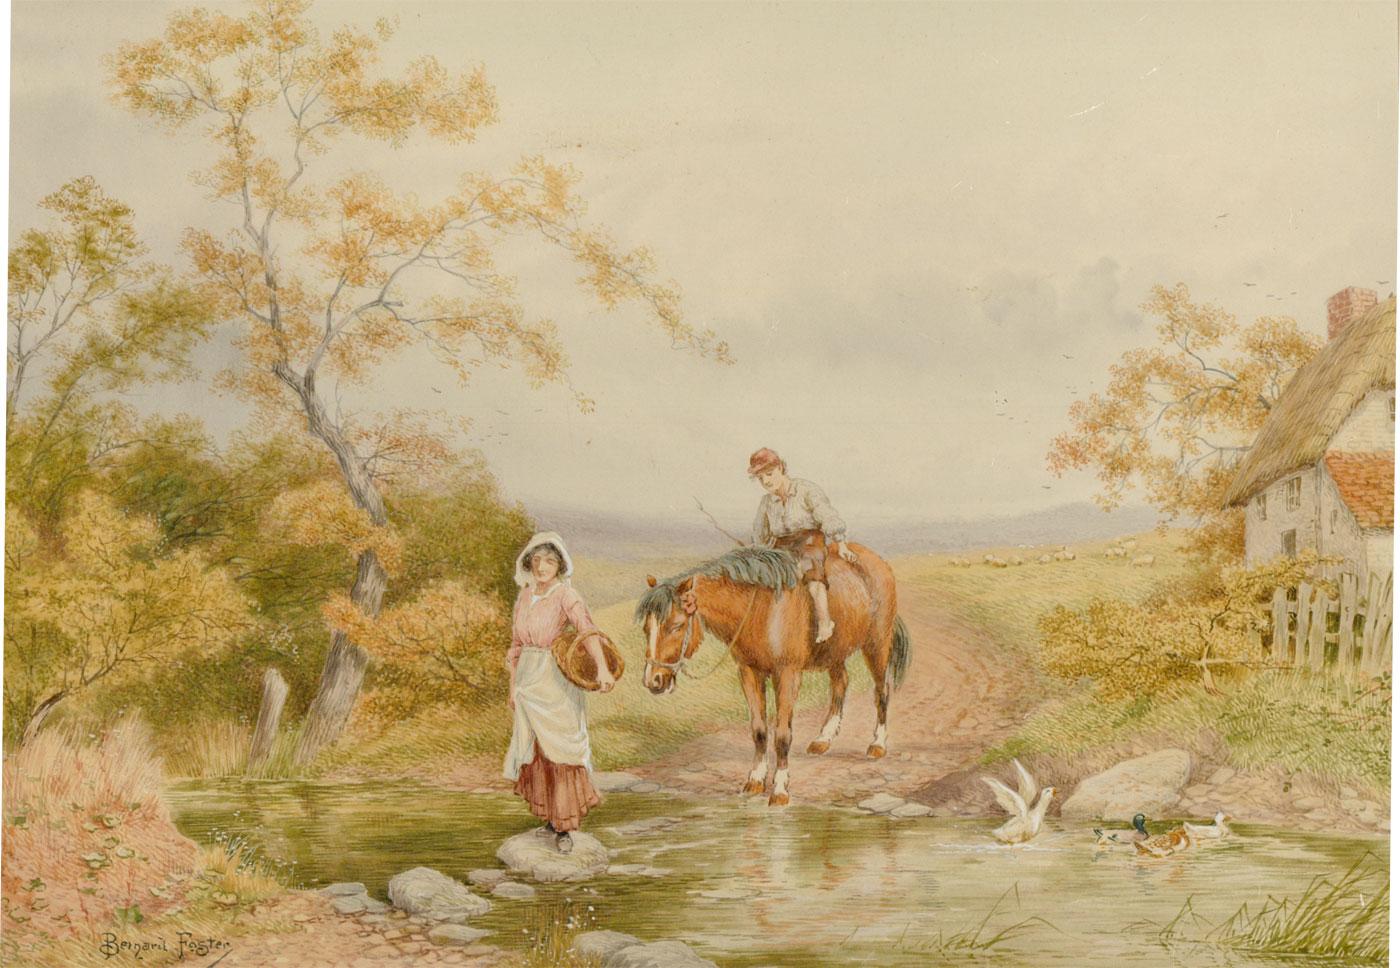 Bernard Foster - Signed 19th Century Watercolour, Travellers in a Landscape - Art by Unknown